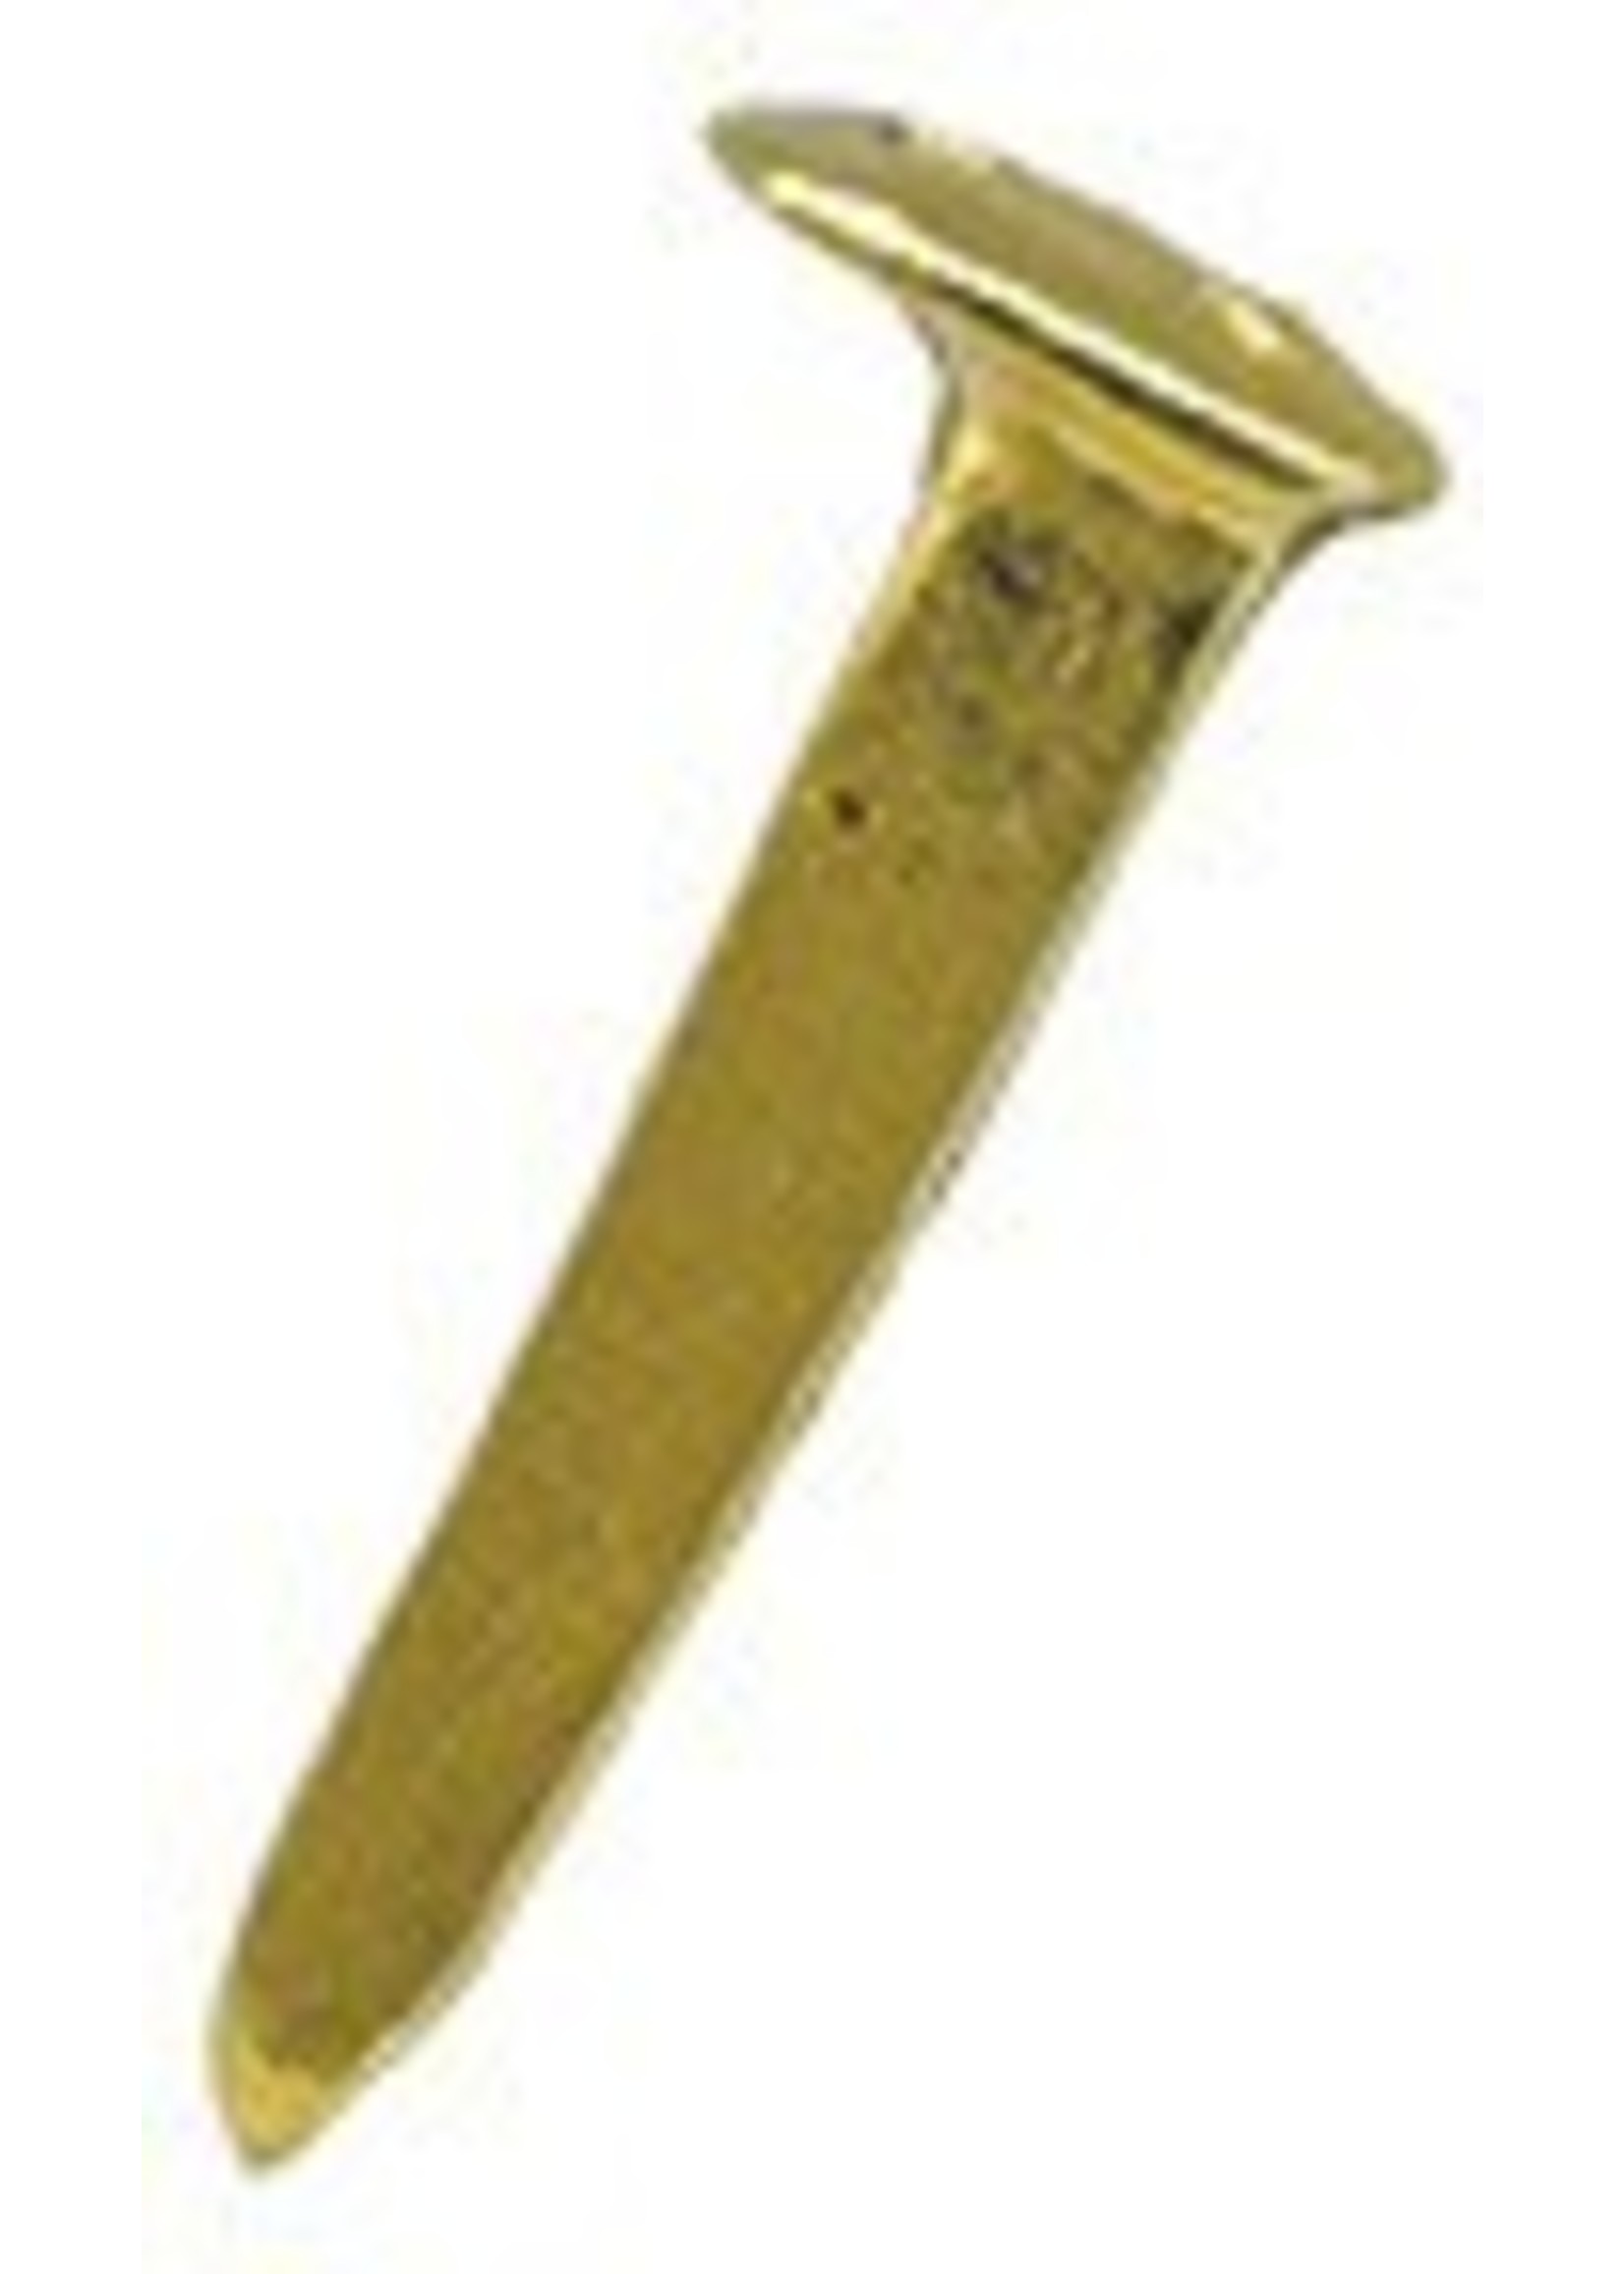 Golden Spike Tie Tack (Pin)- Discontinued